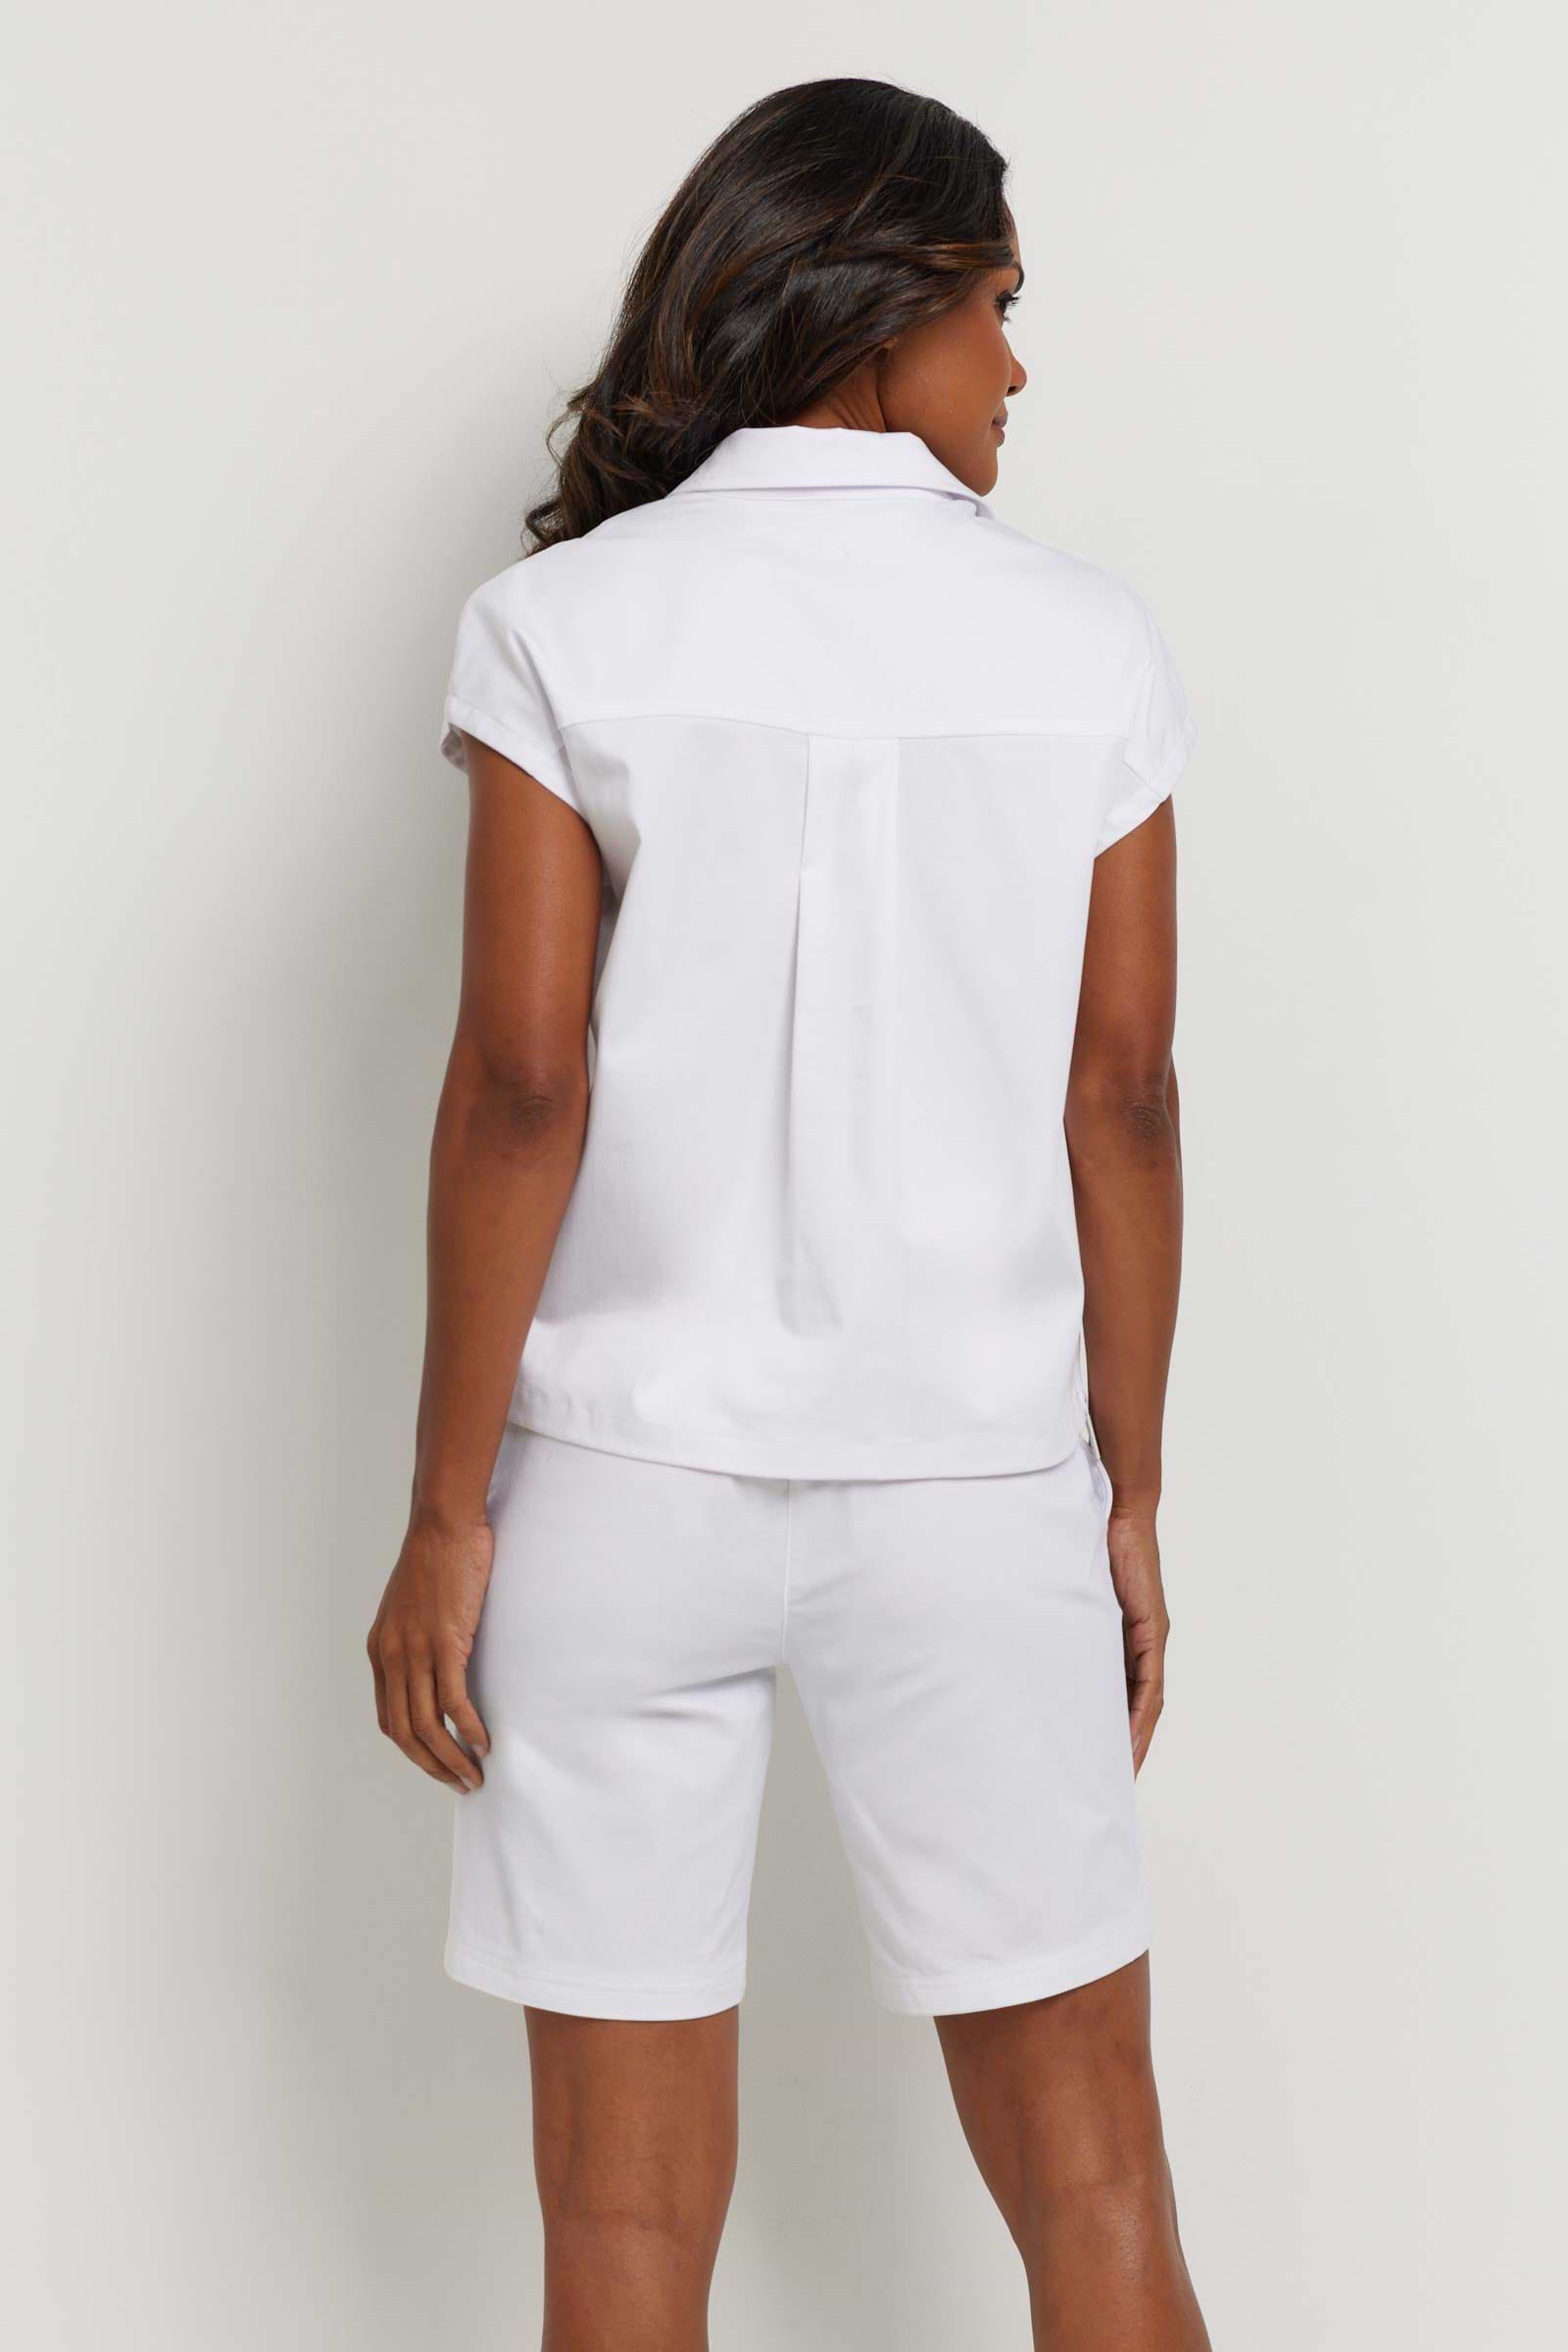 The Best Travel Top. Woman Showing the Back Profile of a Trixie Techno Poplin Top in White.